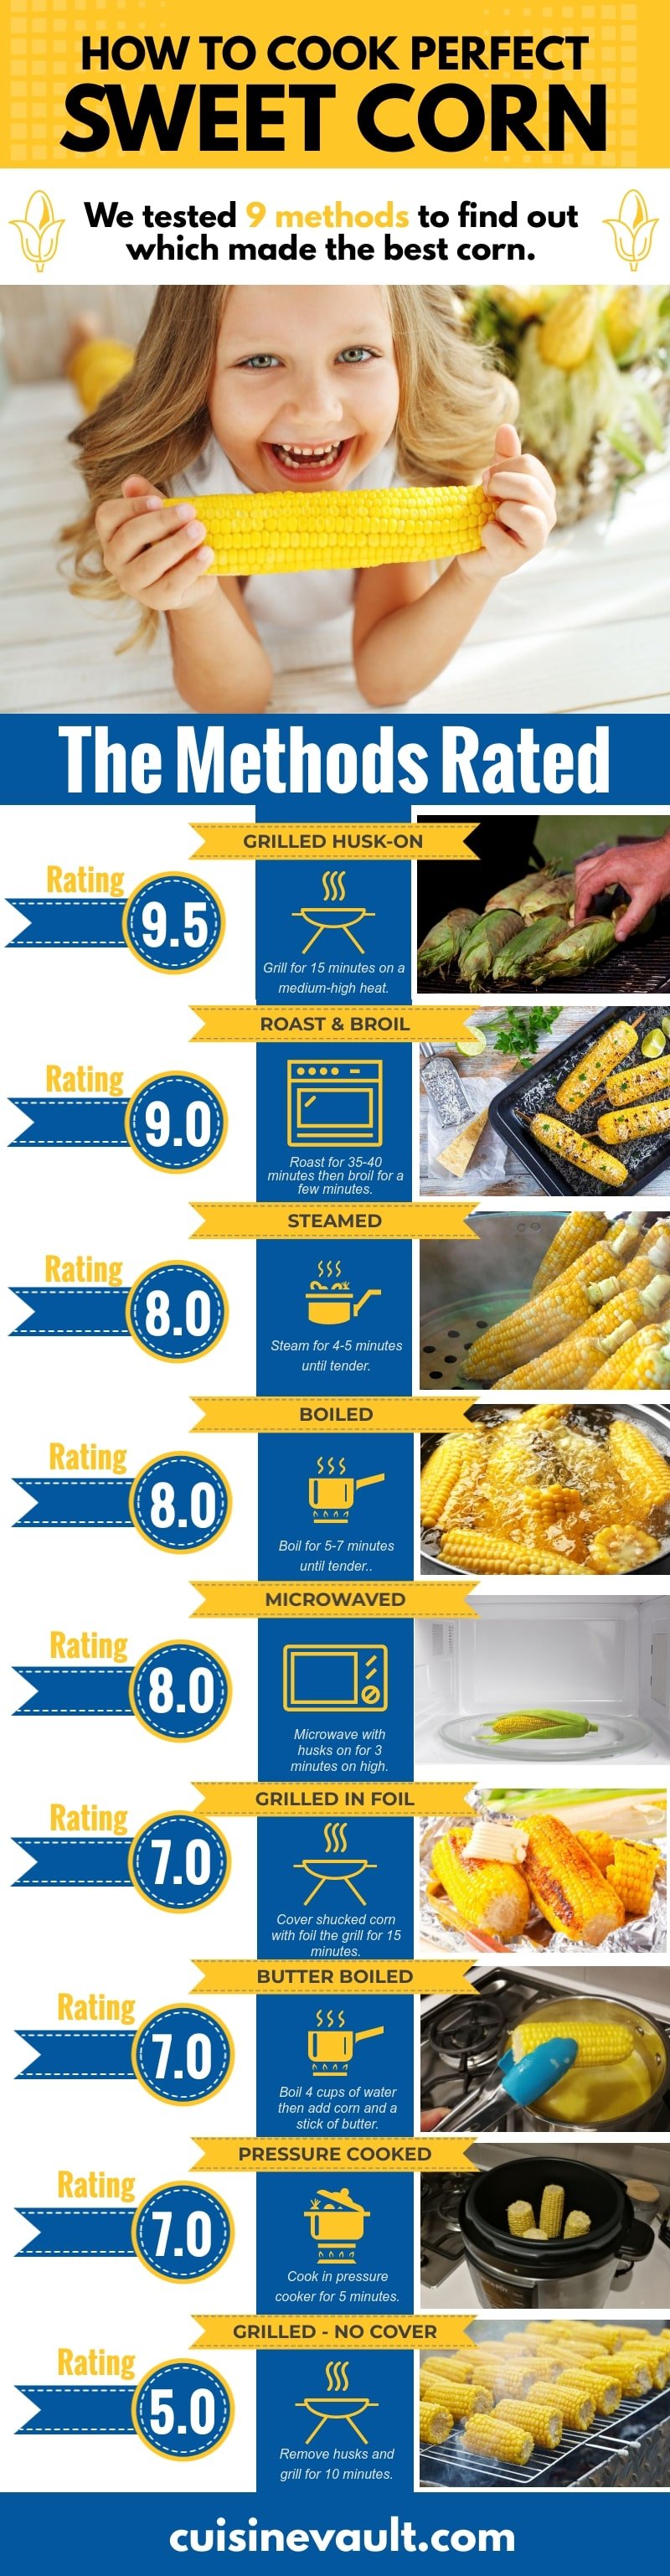 Infographic showing 9 ways to cook corn and their ratings